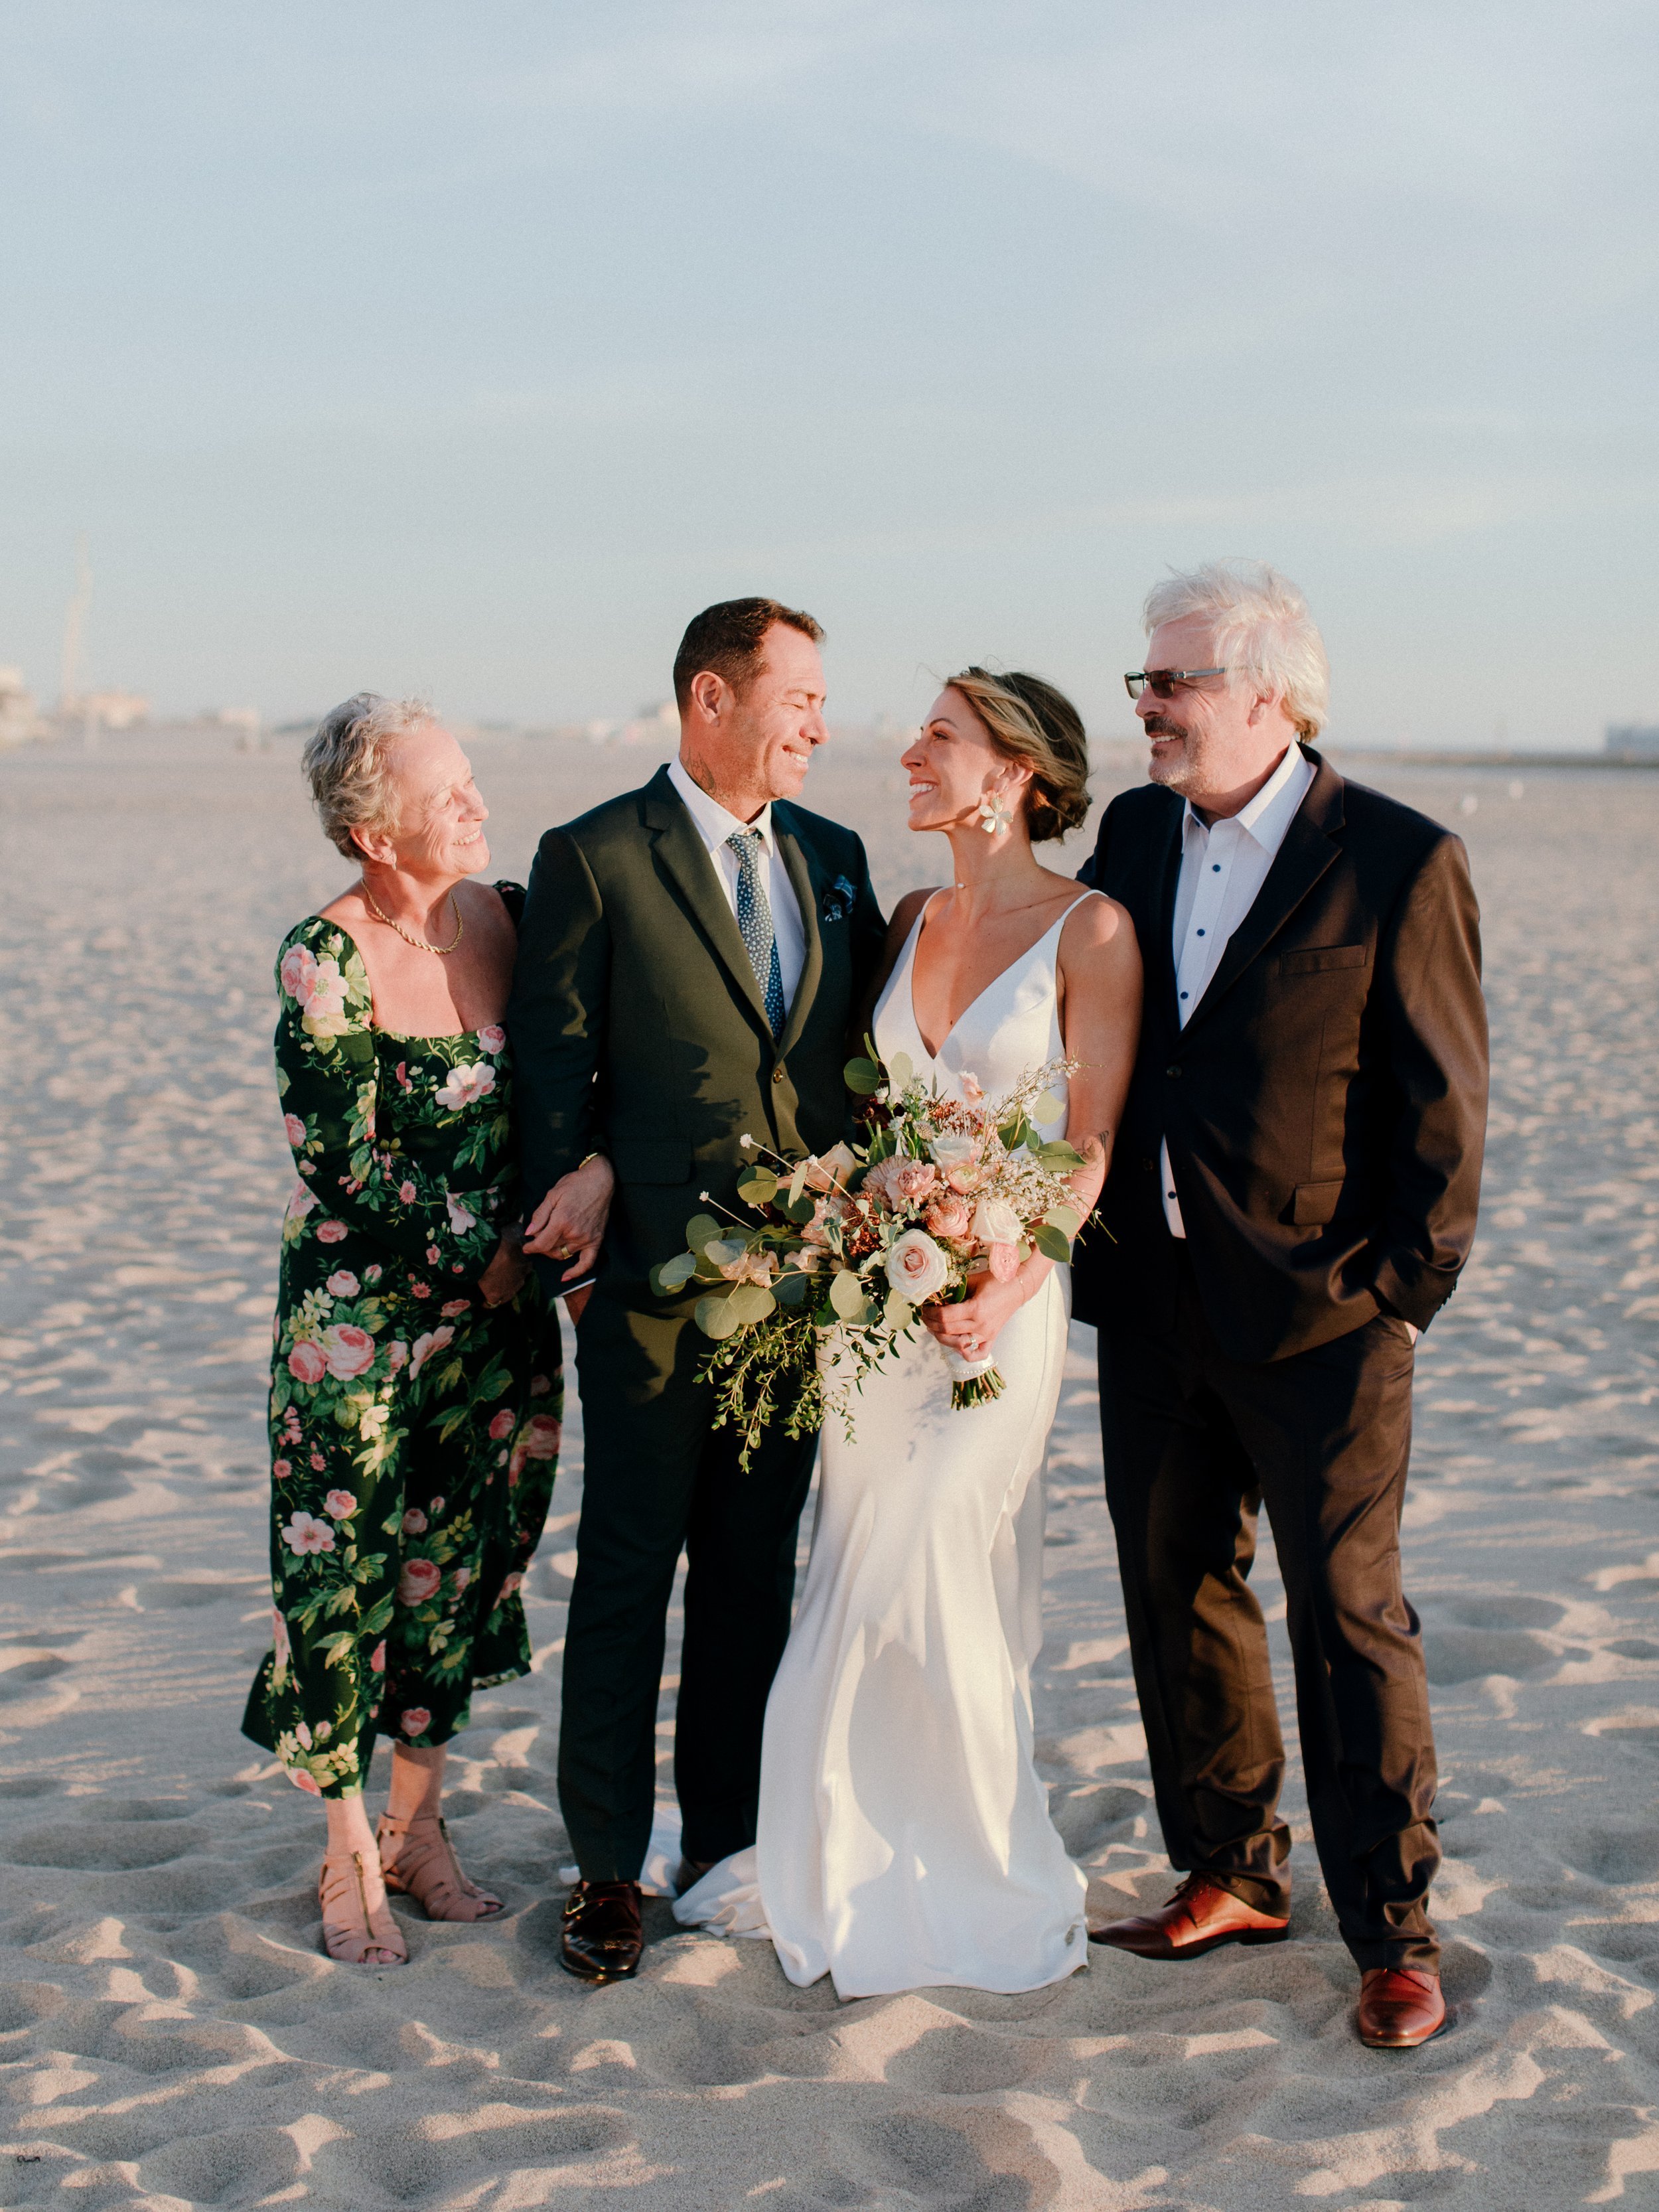 www.santabarbarawedding.com | Chris J. Evans | Paul Smith Suit | Couple with The Brides Parents on the Beach